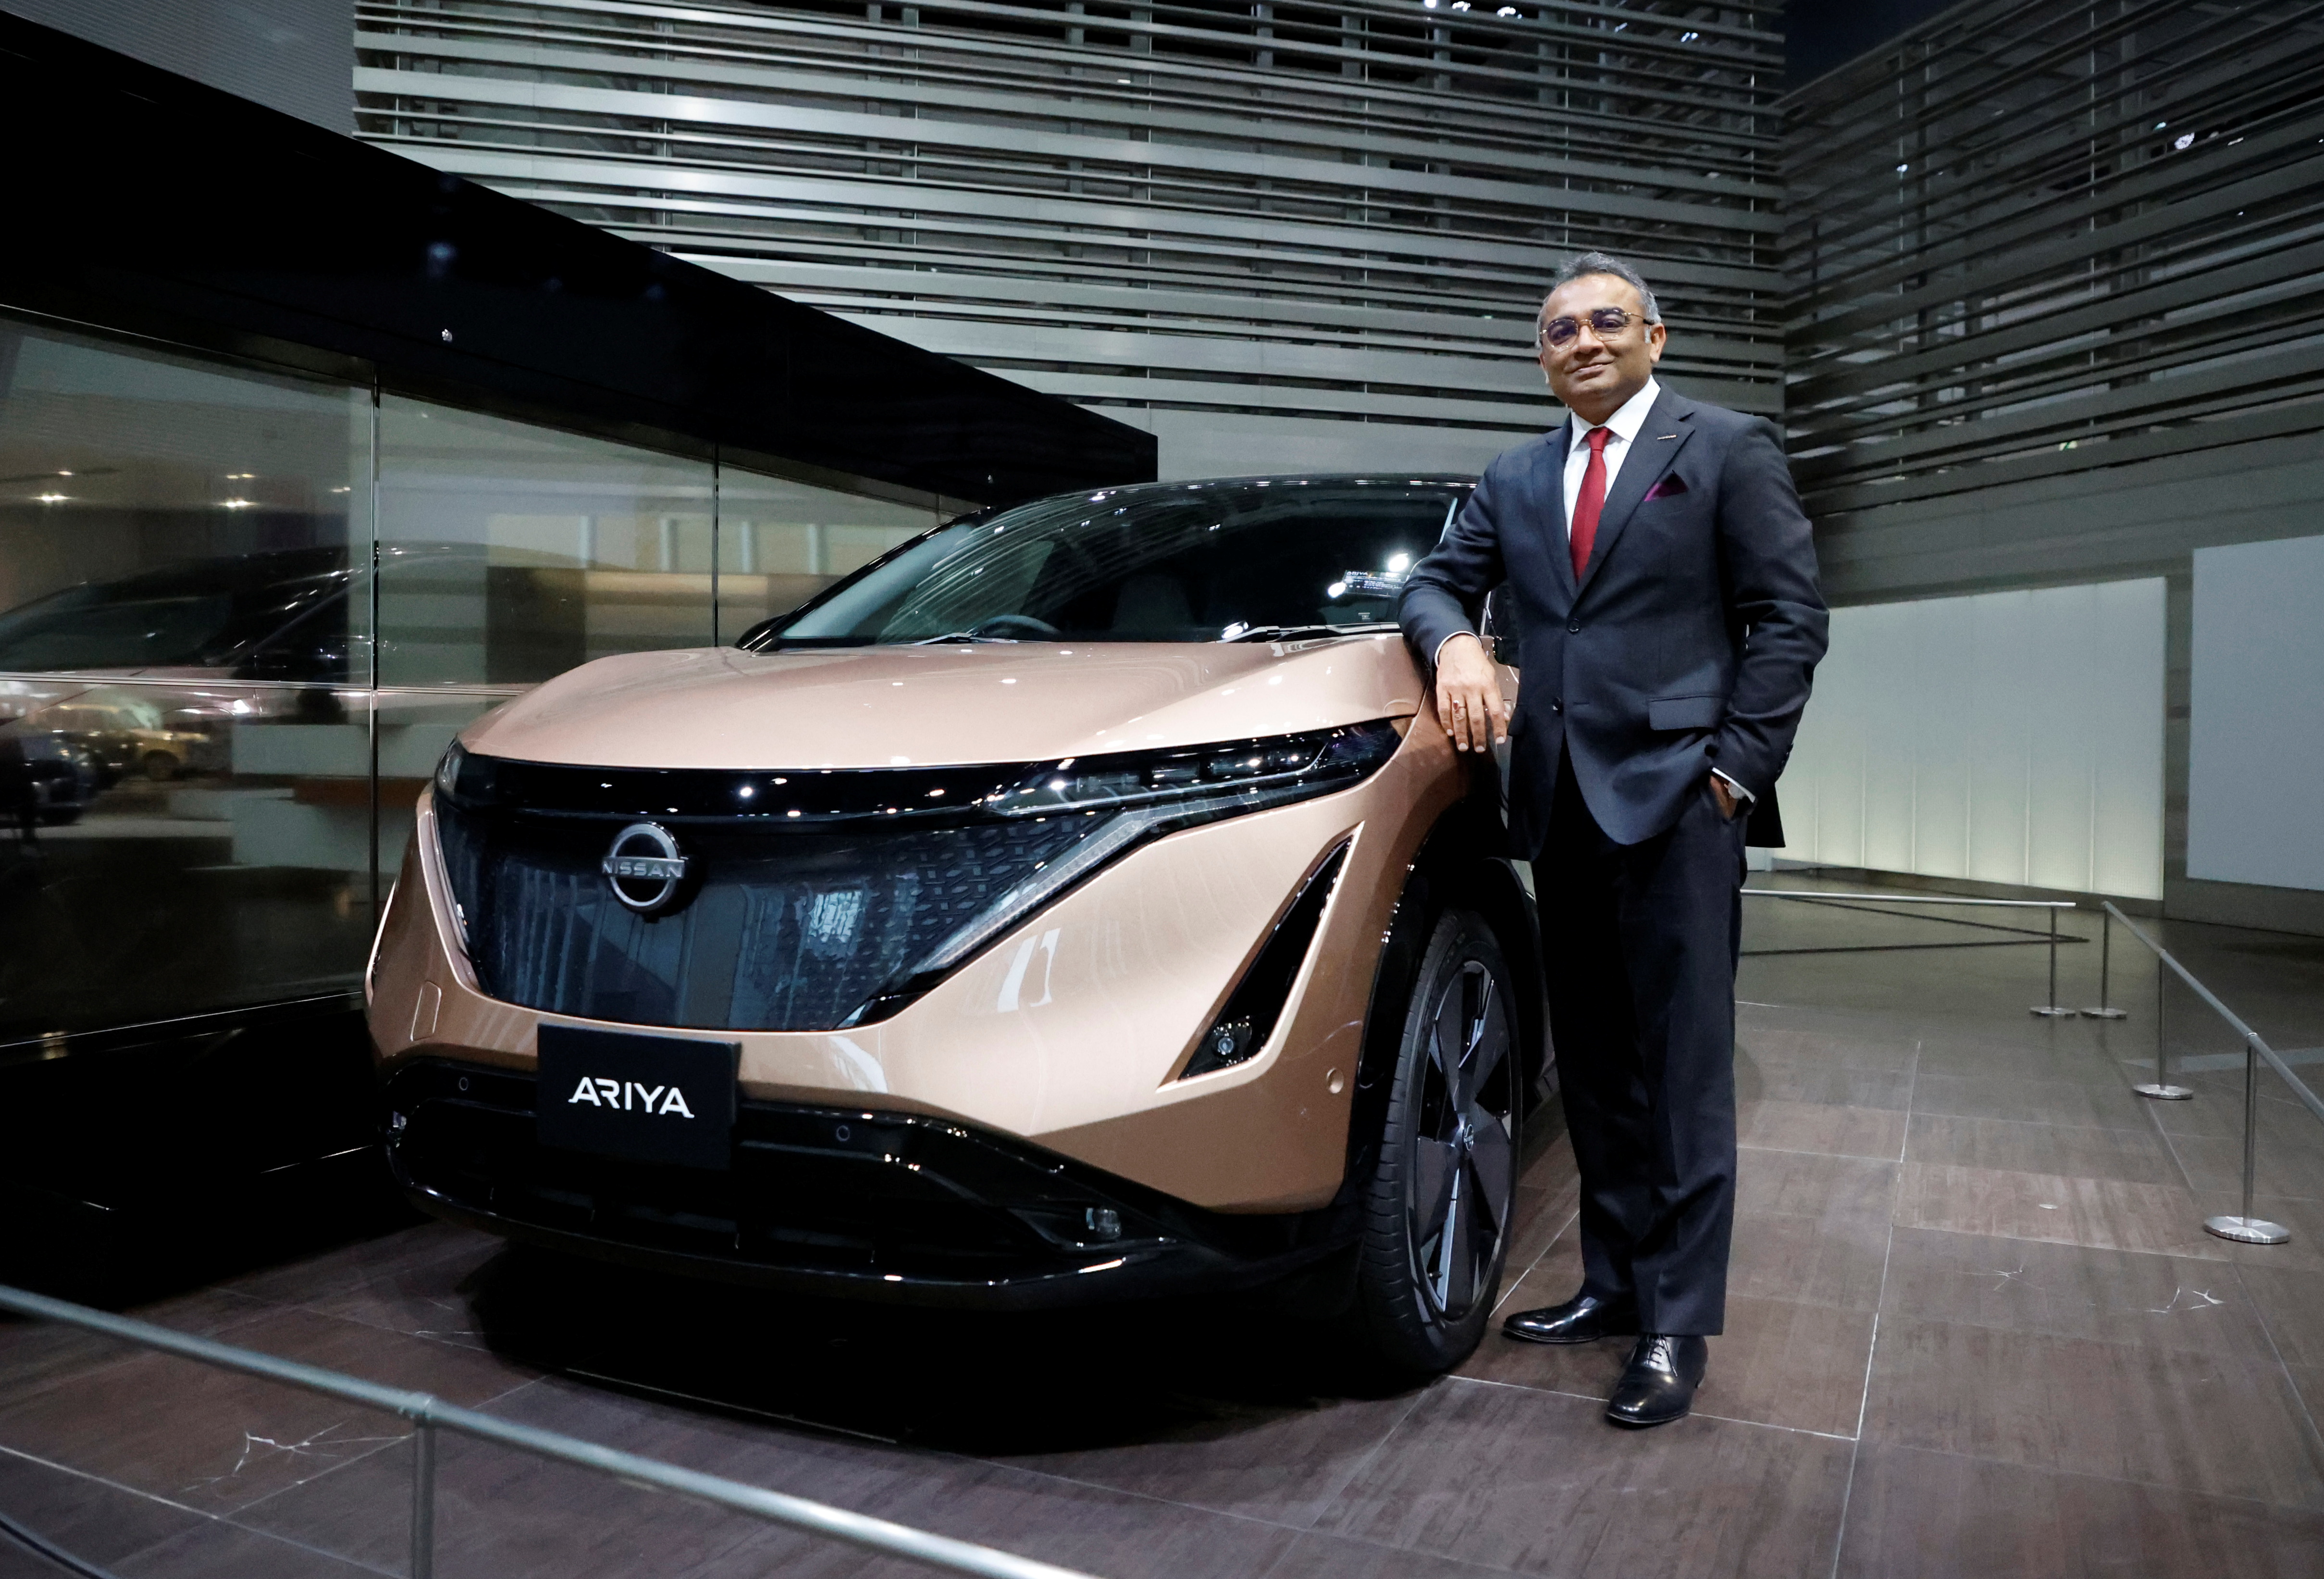 Nissan COO Ashwani Gupta poses with Ariya all-electric SUV after an interview with Reuters at its showroom in Yokohama